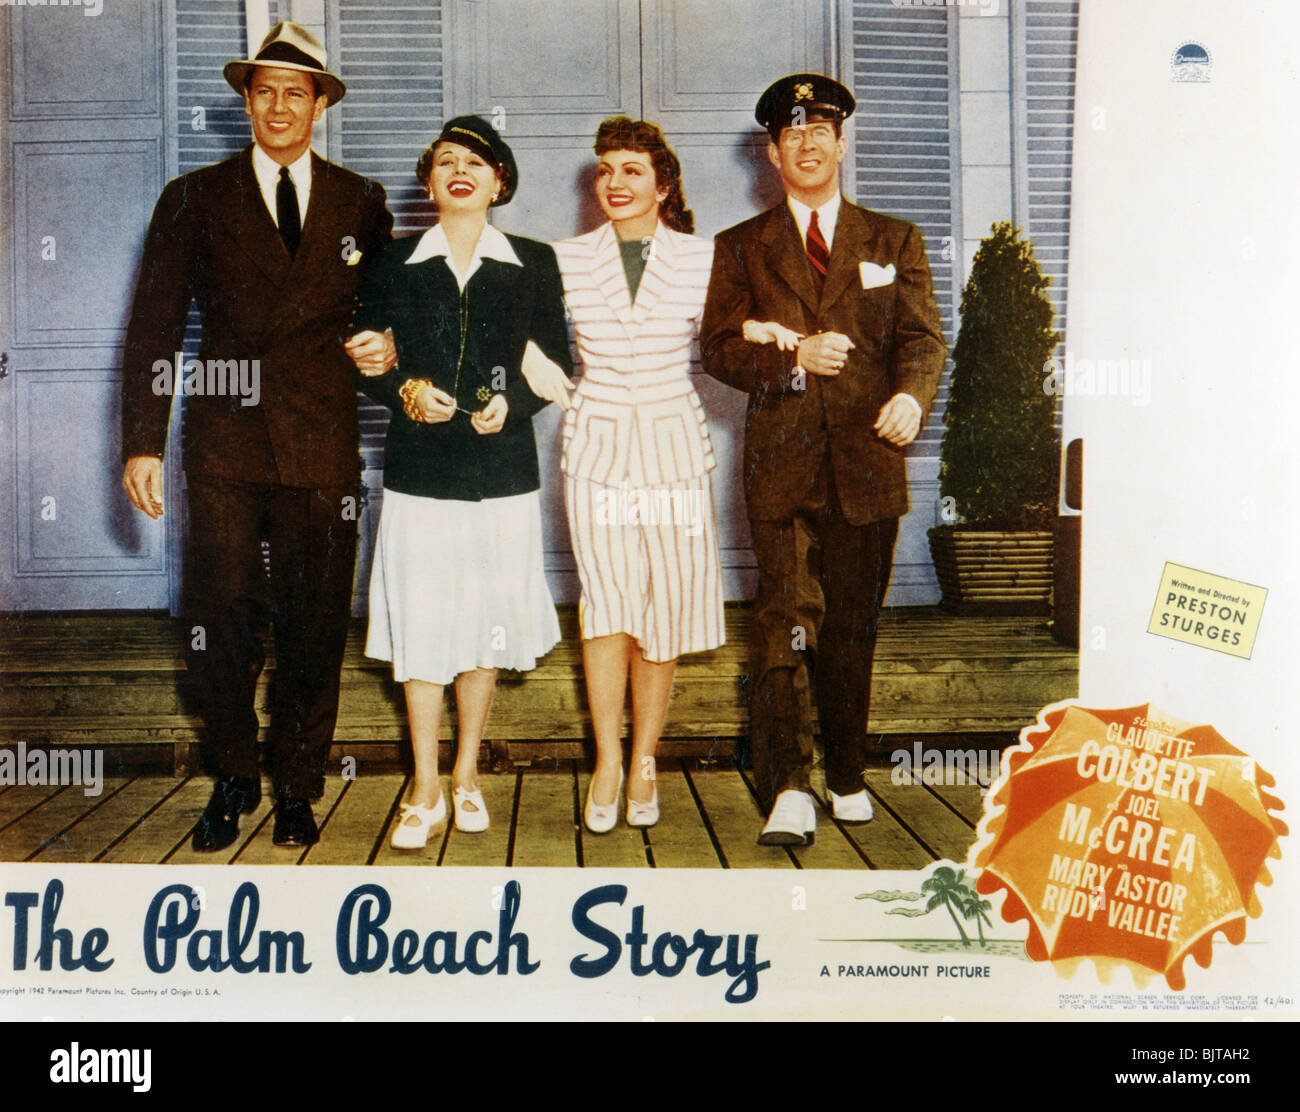 THE PALM BEACH STORY - 1942 Paramo8unt film with Claudette Colbert in white dress and Mary Astor Stock Photo